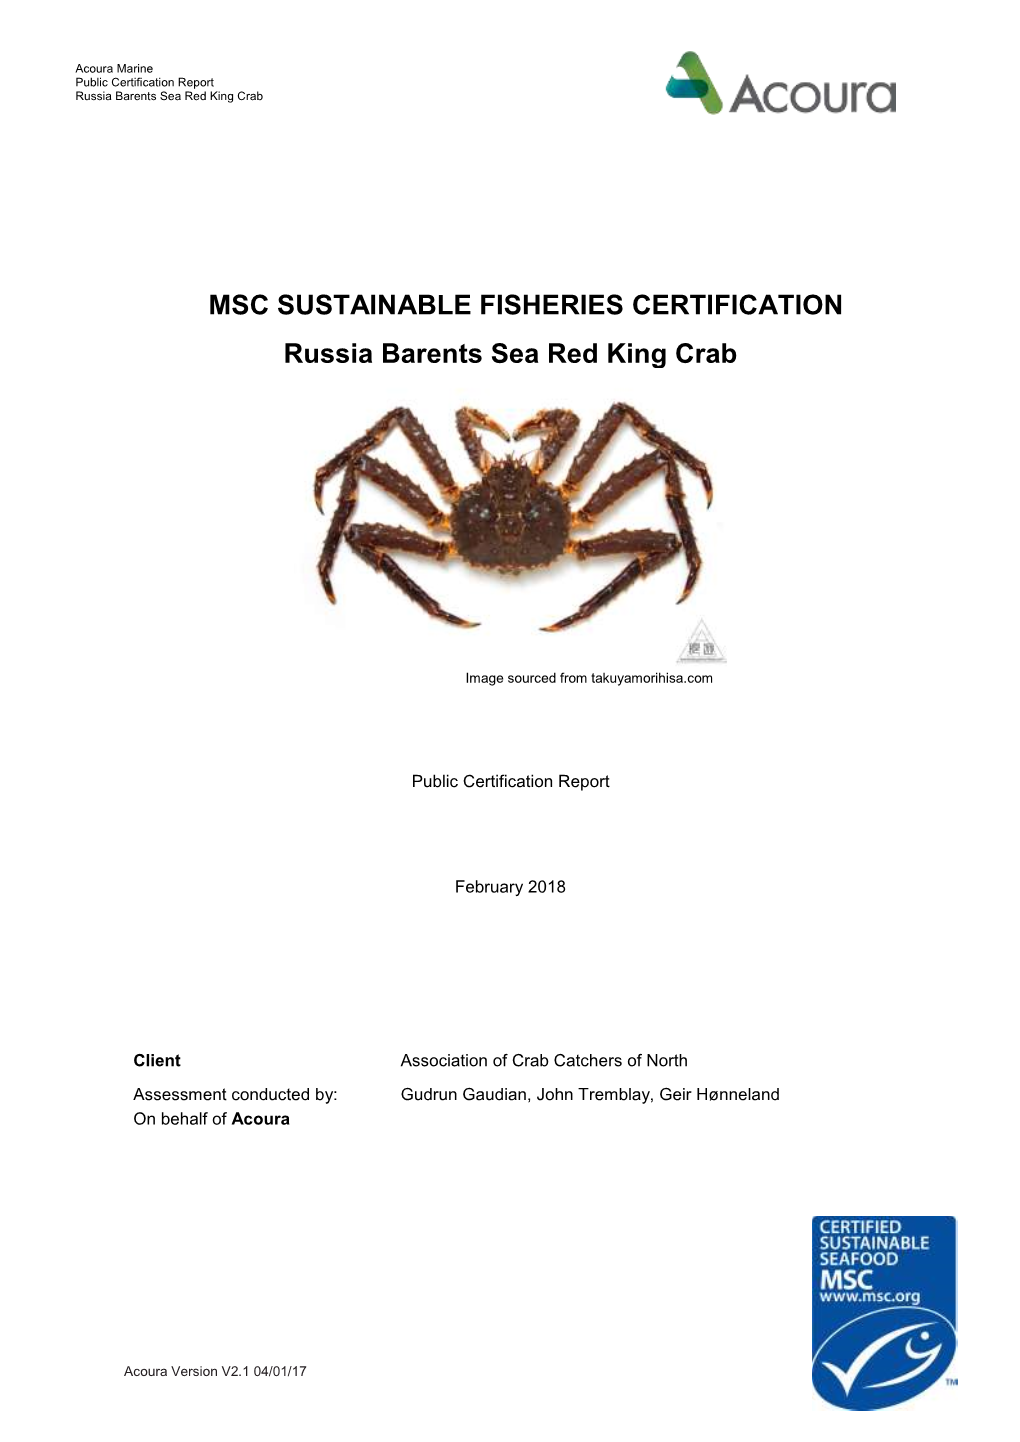 MSC SUSTAINABLE FISHERIES CERTIFICATION Russia Barents Sea Red King Crab